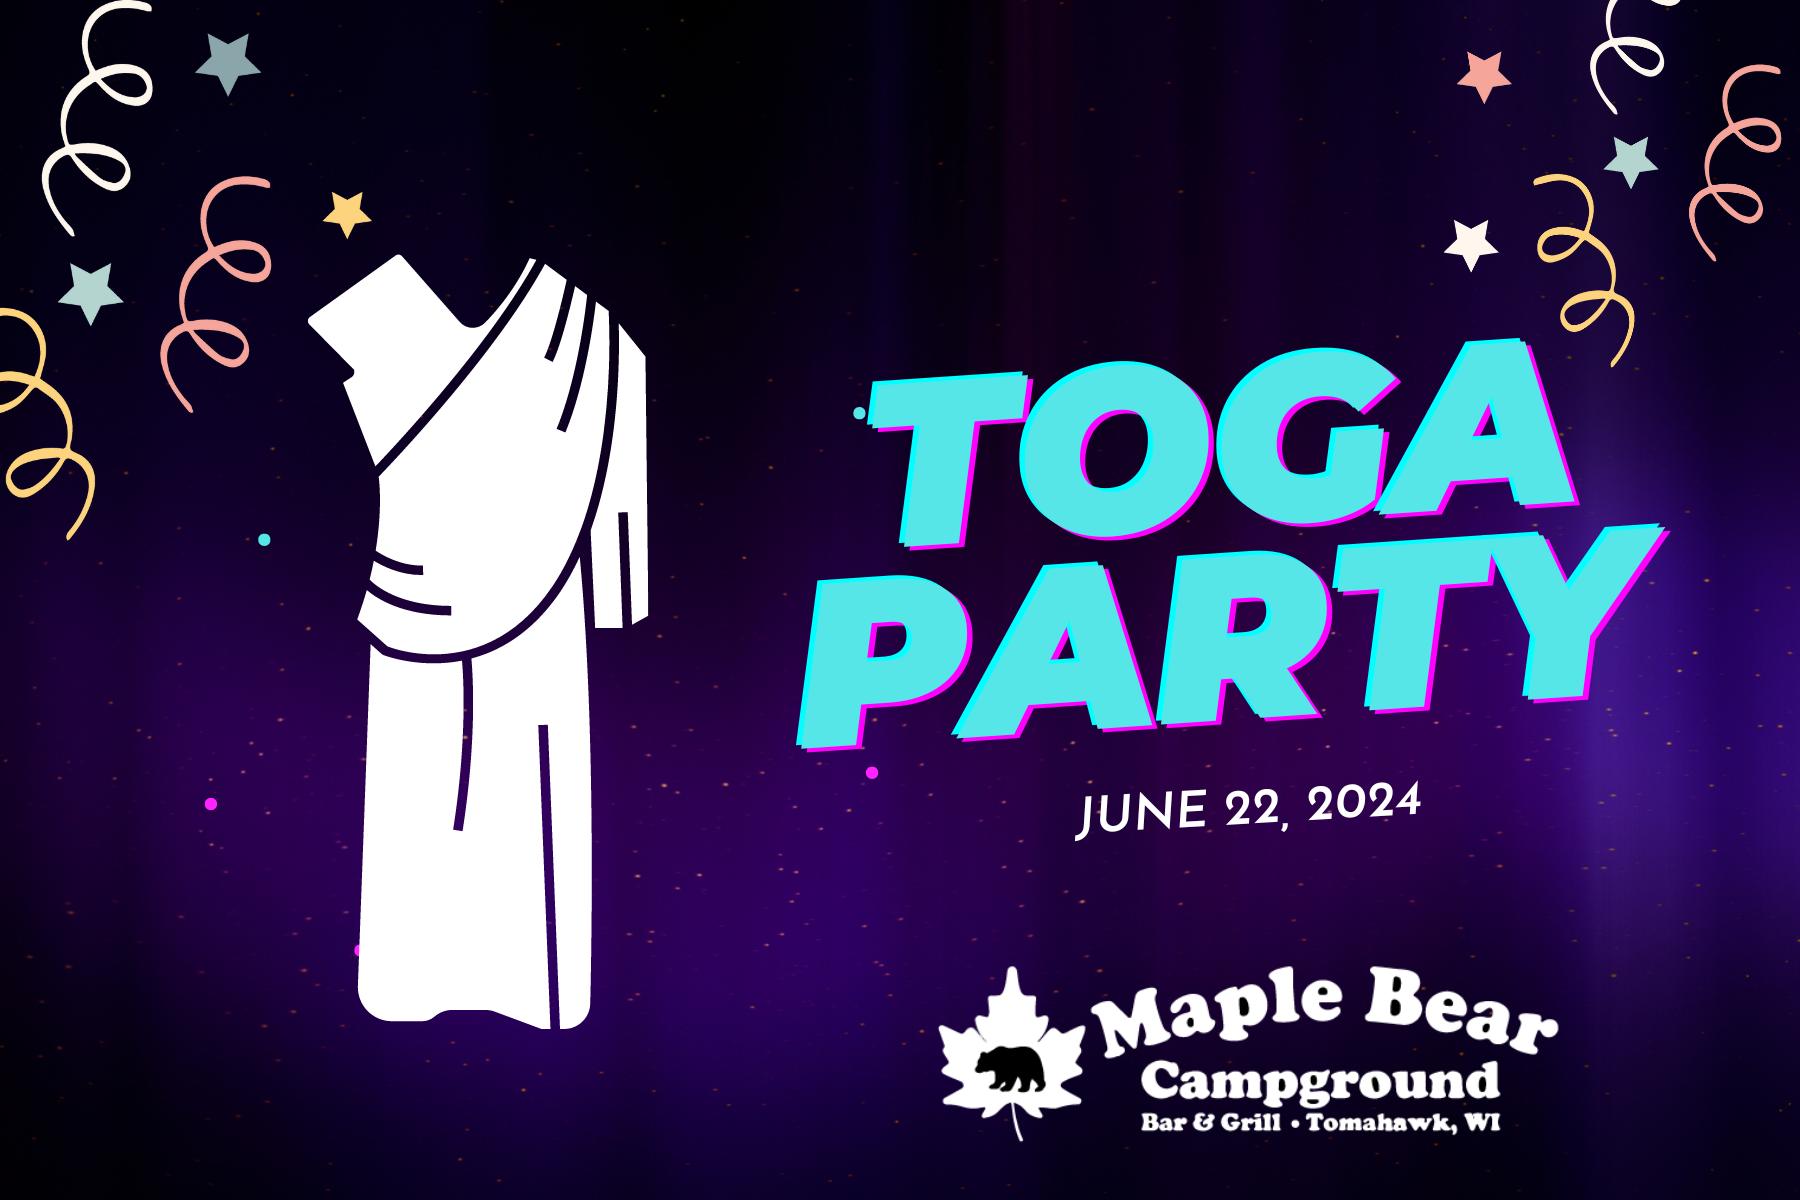 TOGA Party at Maple Bear Campground Tomahawk, WI